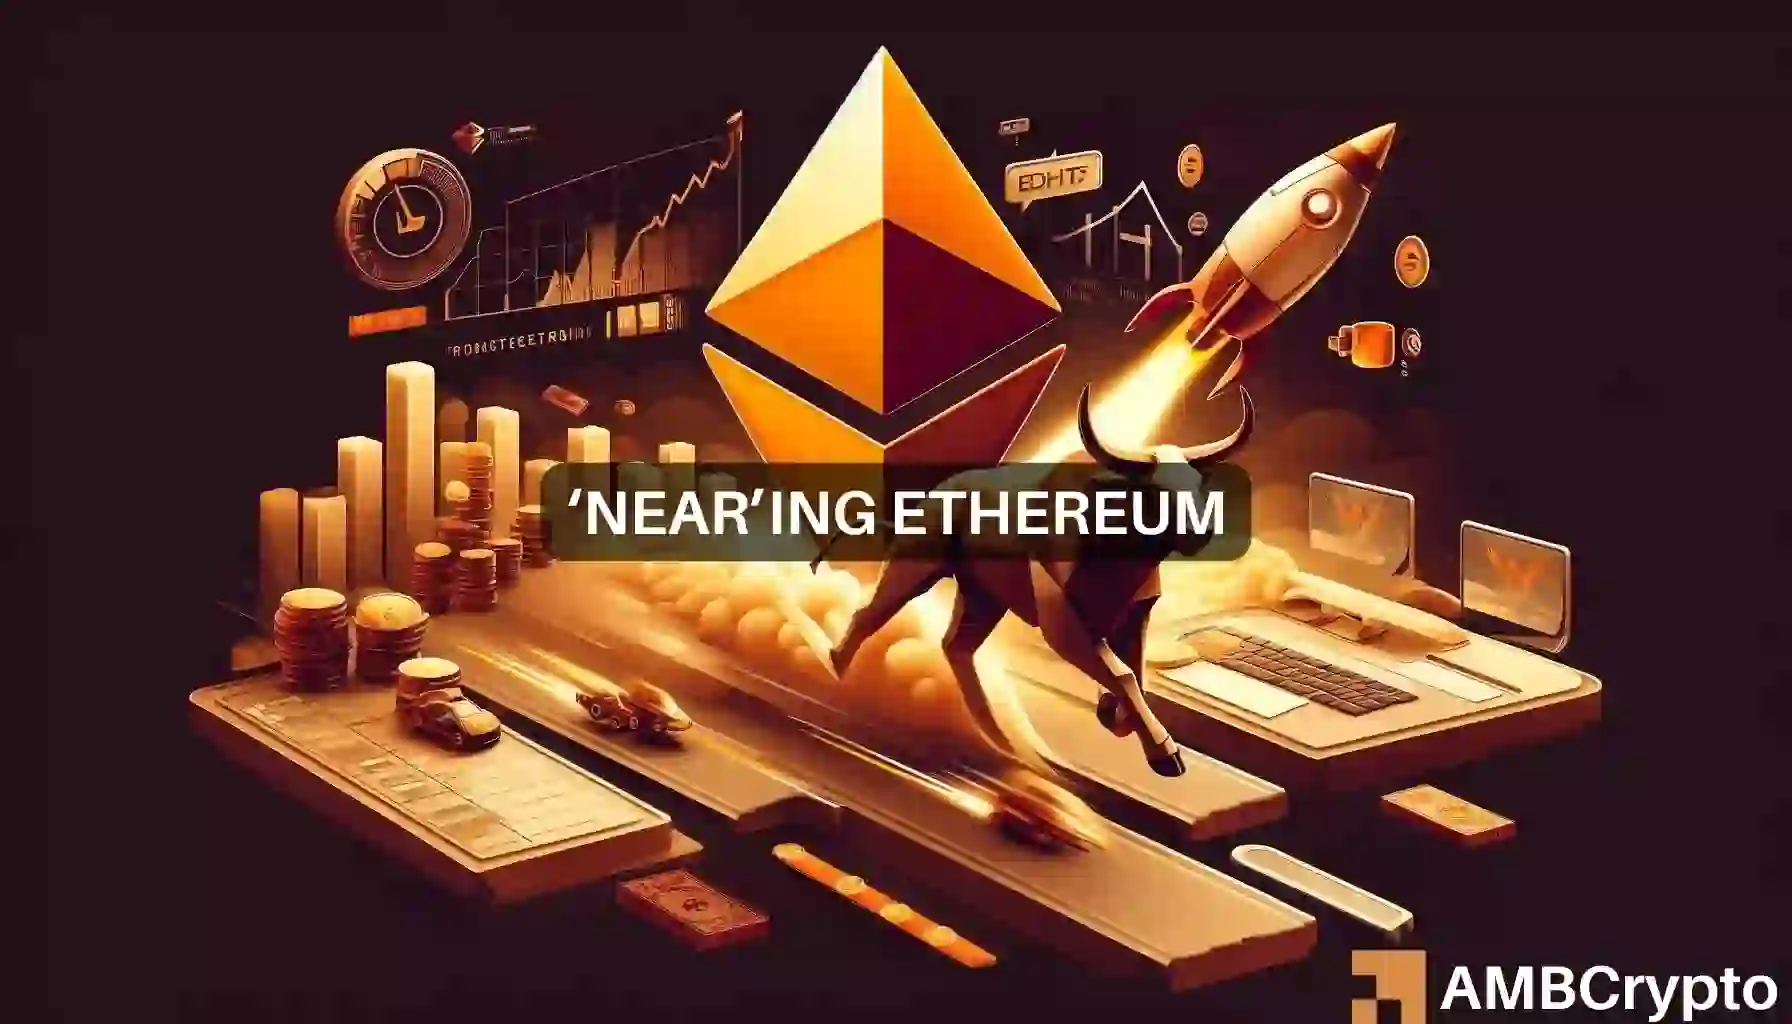 NEAR hits $7.51 - Why Ethereum can be in danger